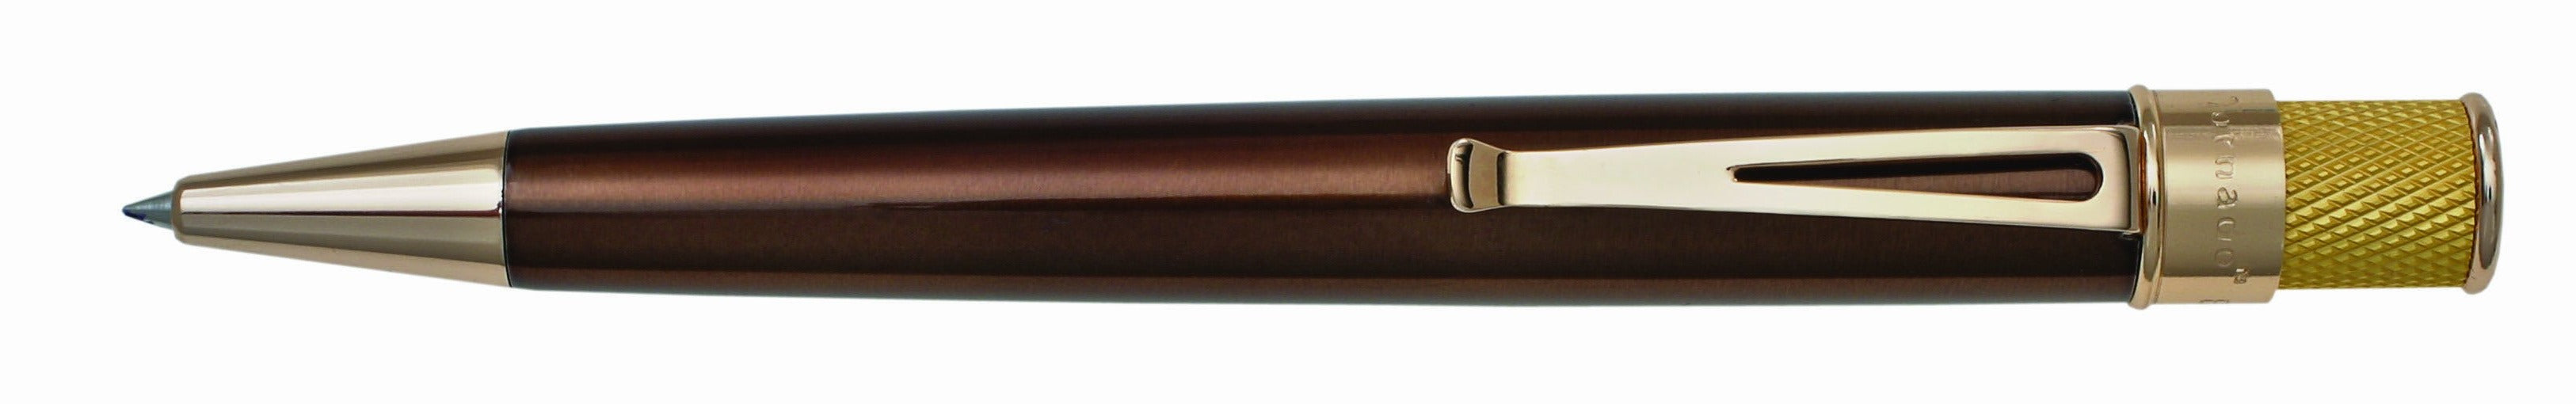 Brown stainless steel barrel with vibrant lacquers, knurl twist-top, packaged in pen stand